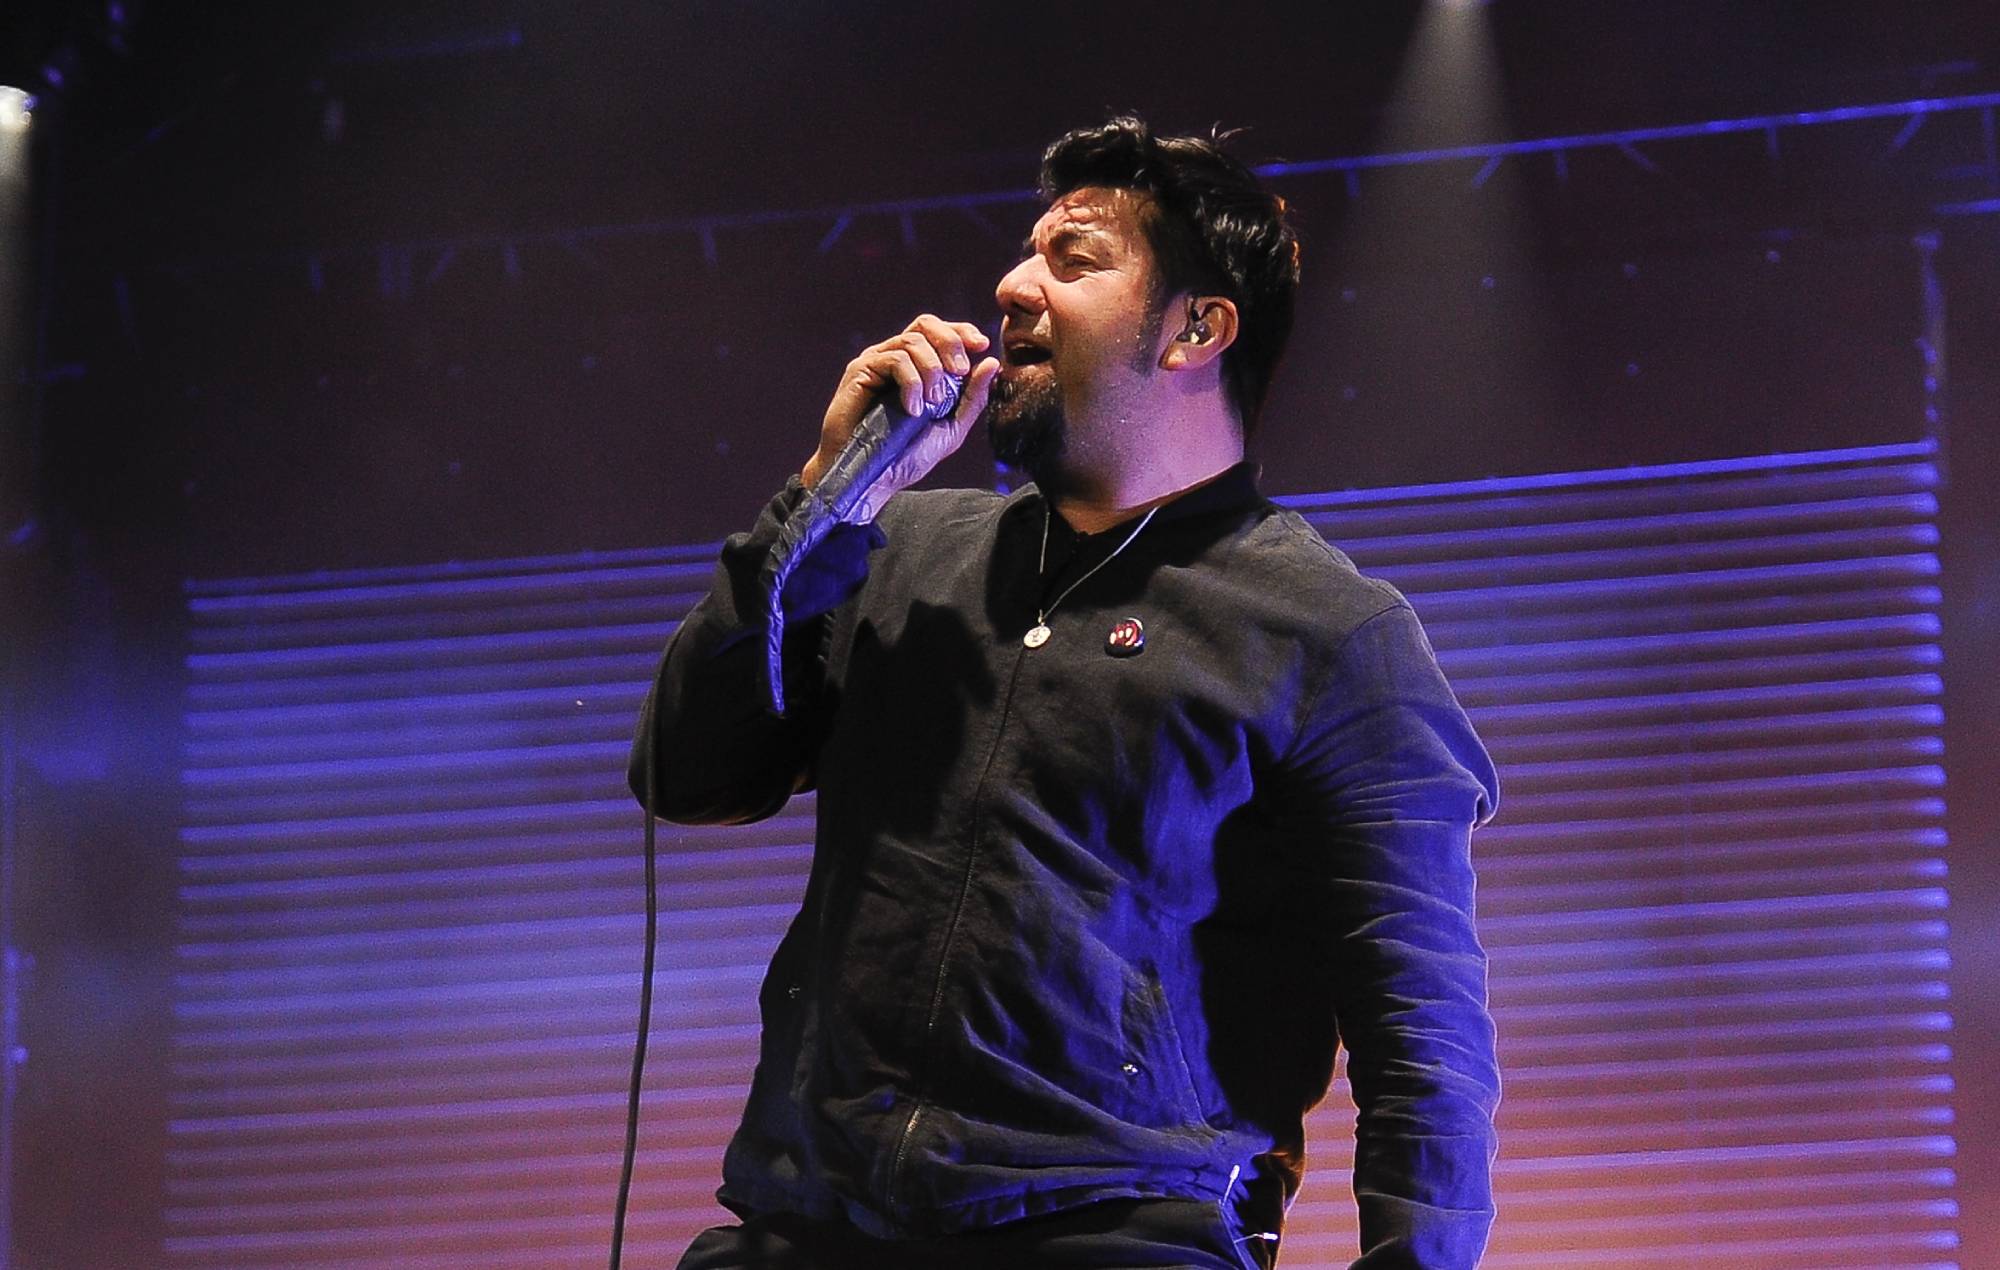 Deftones give update on a new album: “We have a whole record recorded”